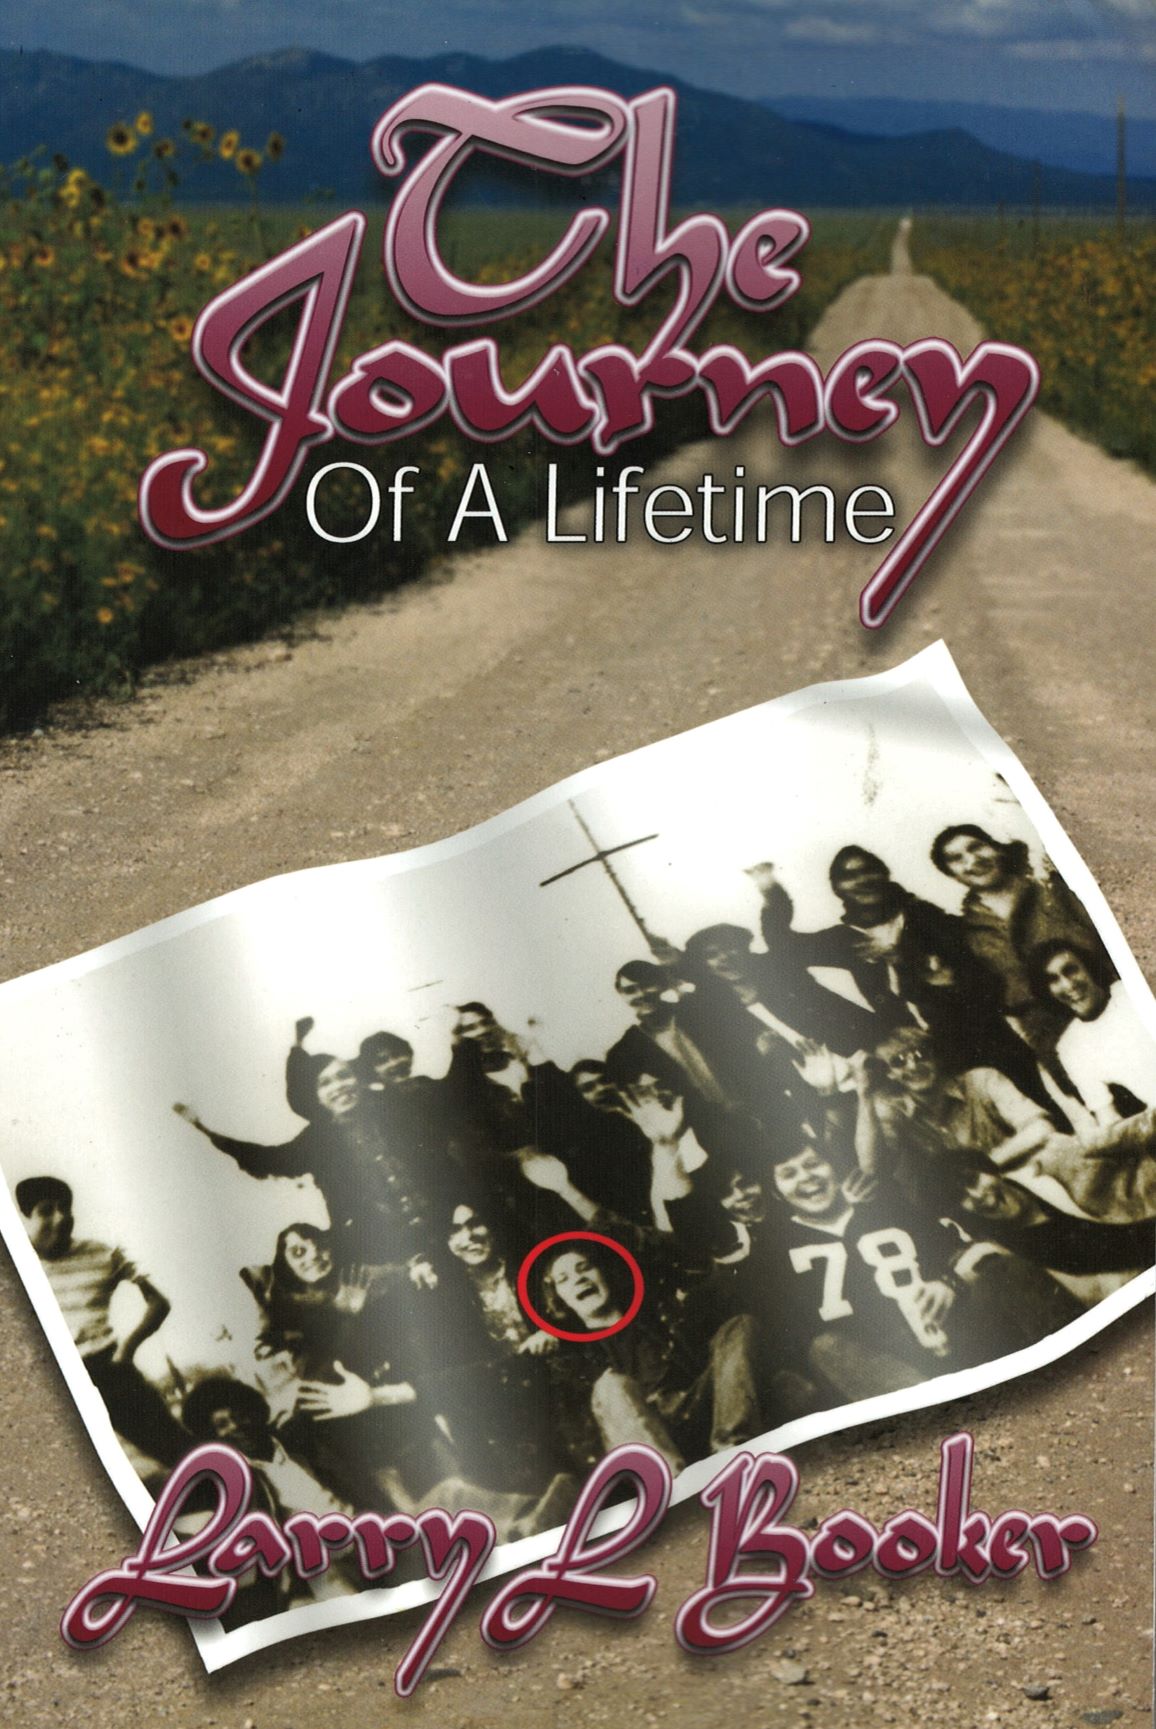 Journey of a Lifetime, The - Larry Booker